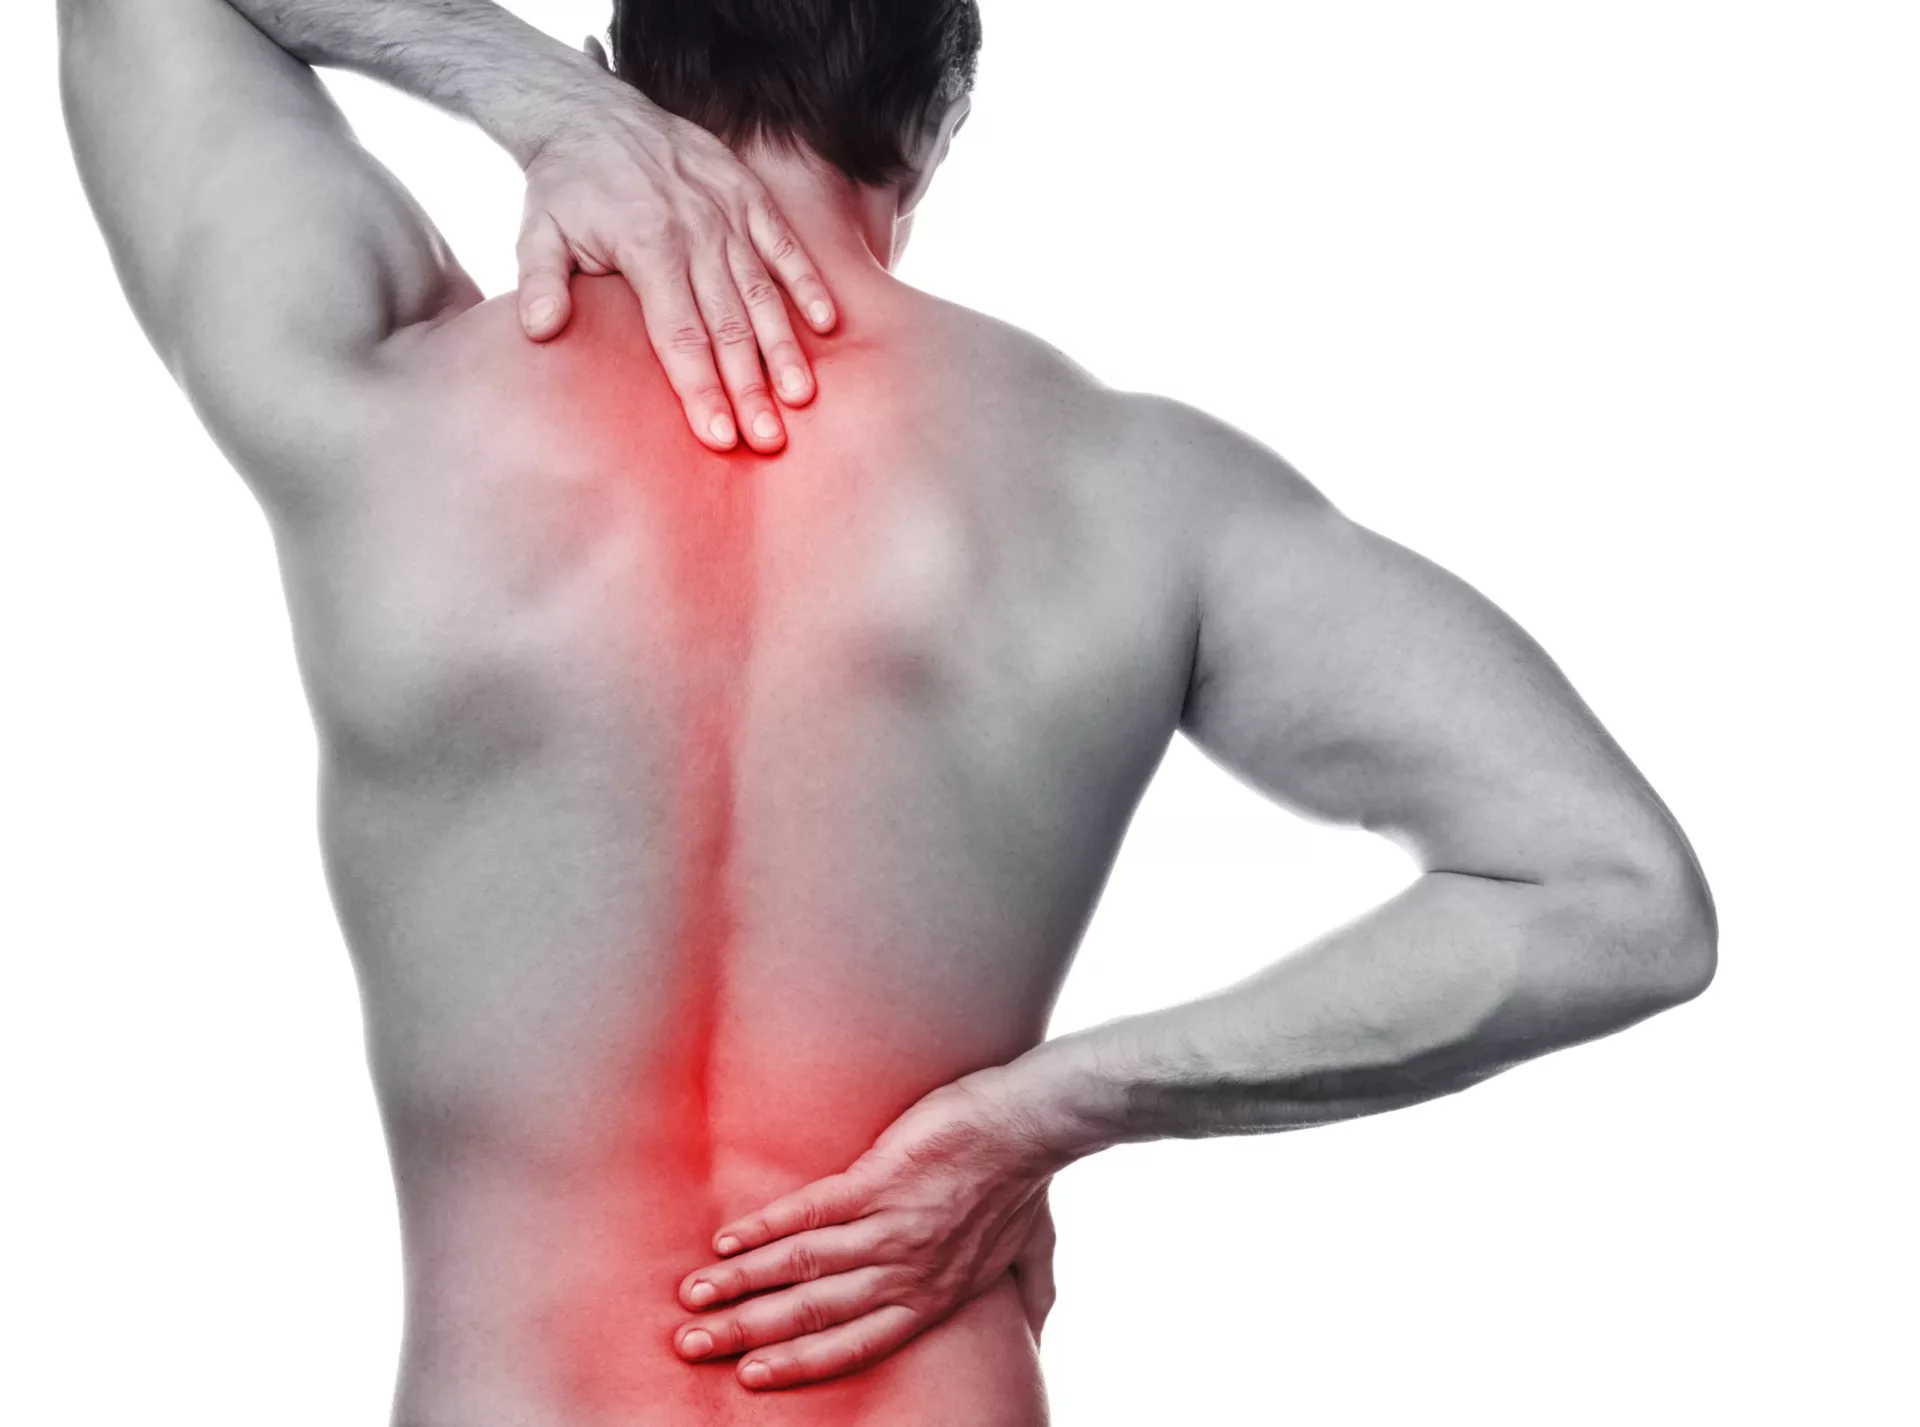 man-with-pain-his-back